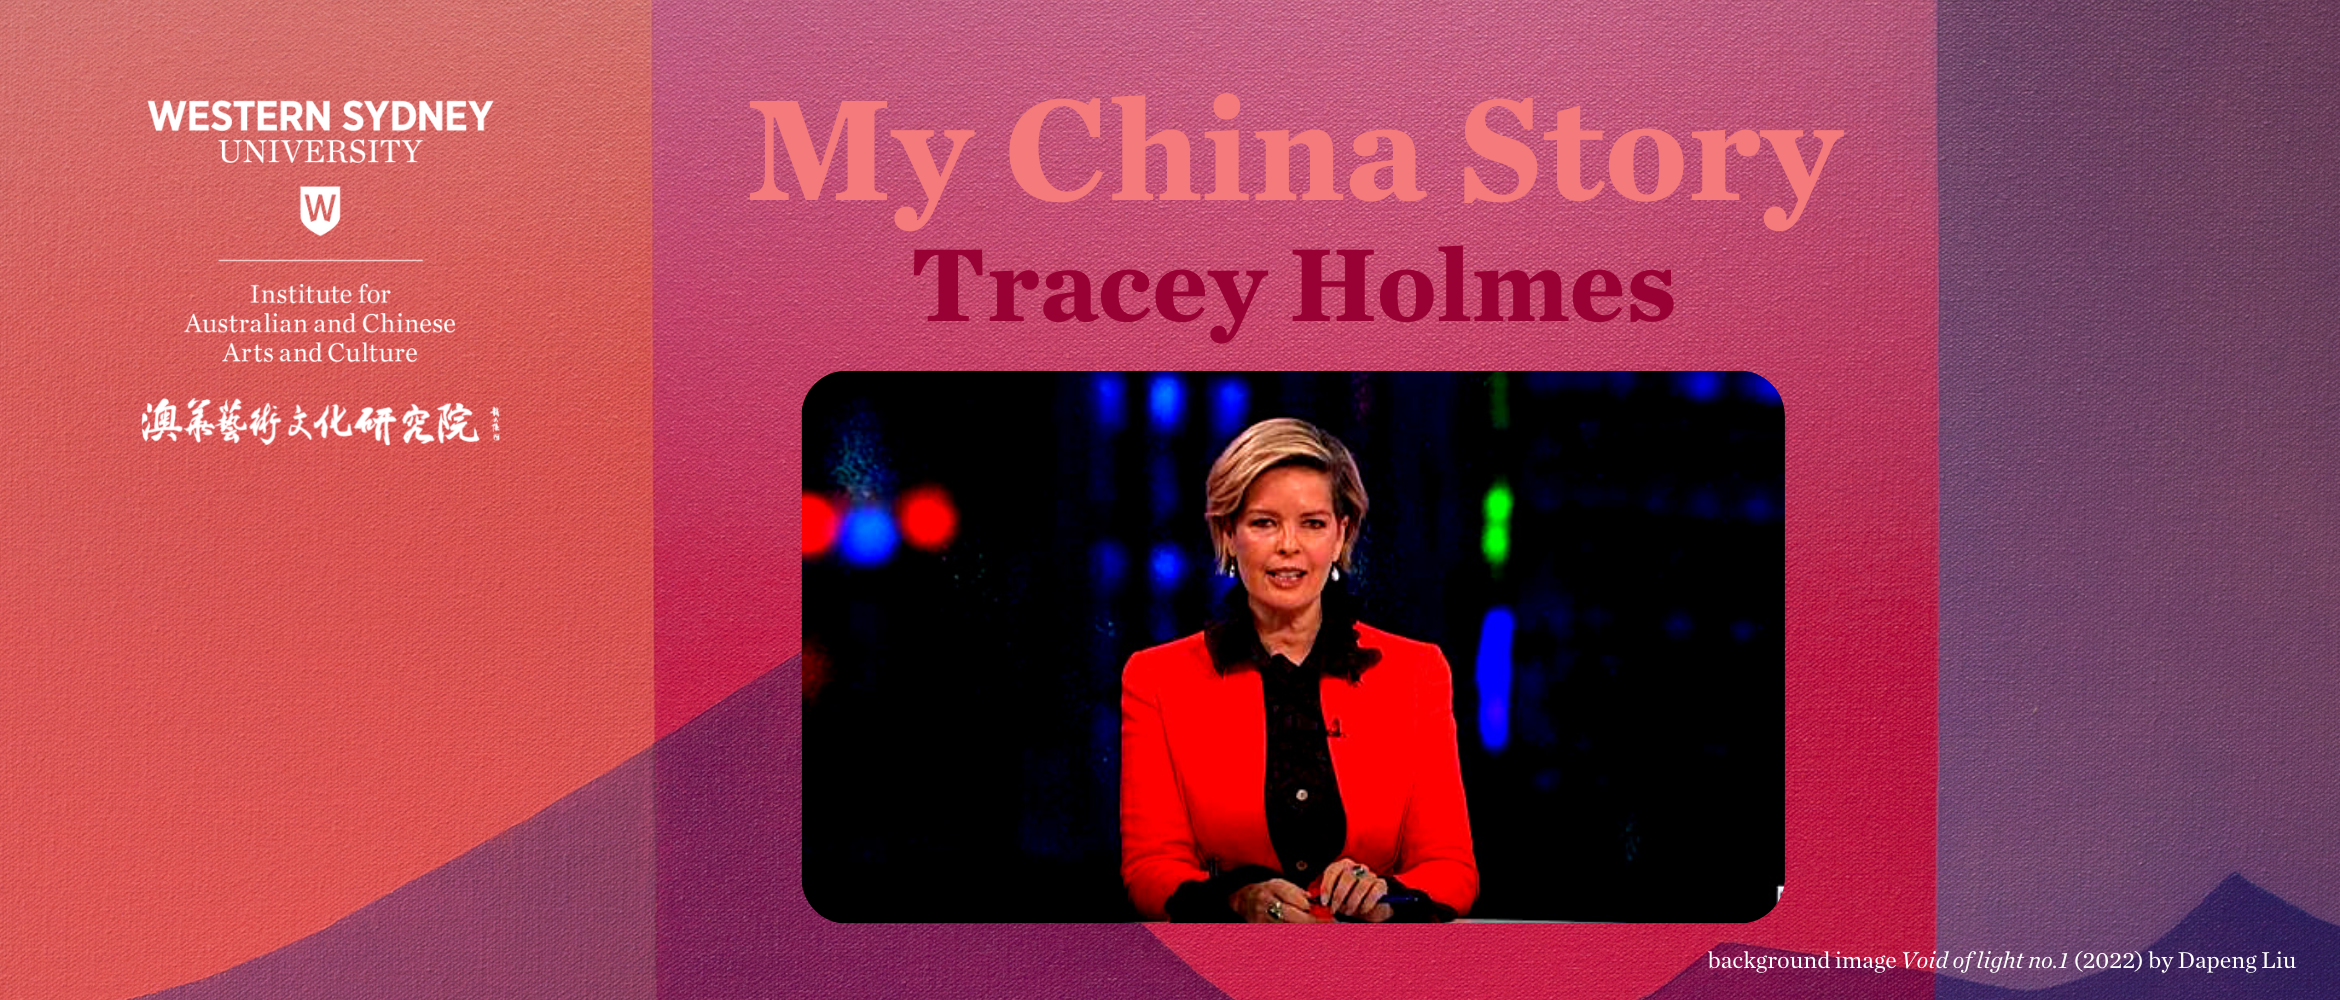 My China Story TRACEY HOLMES IAC Event Page (1170 x 500 px)